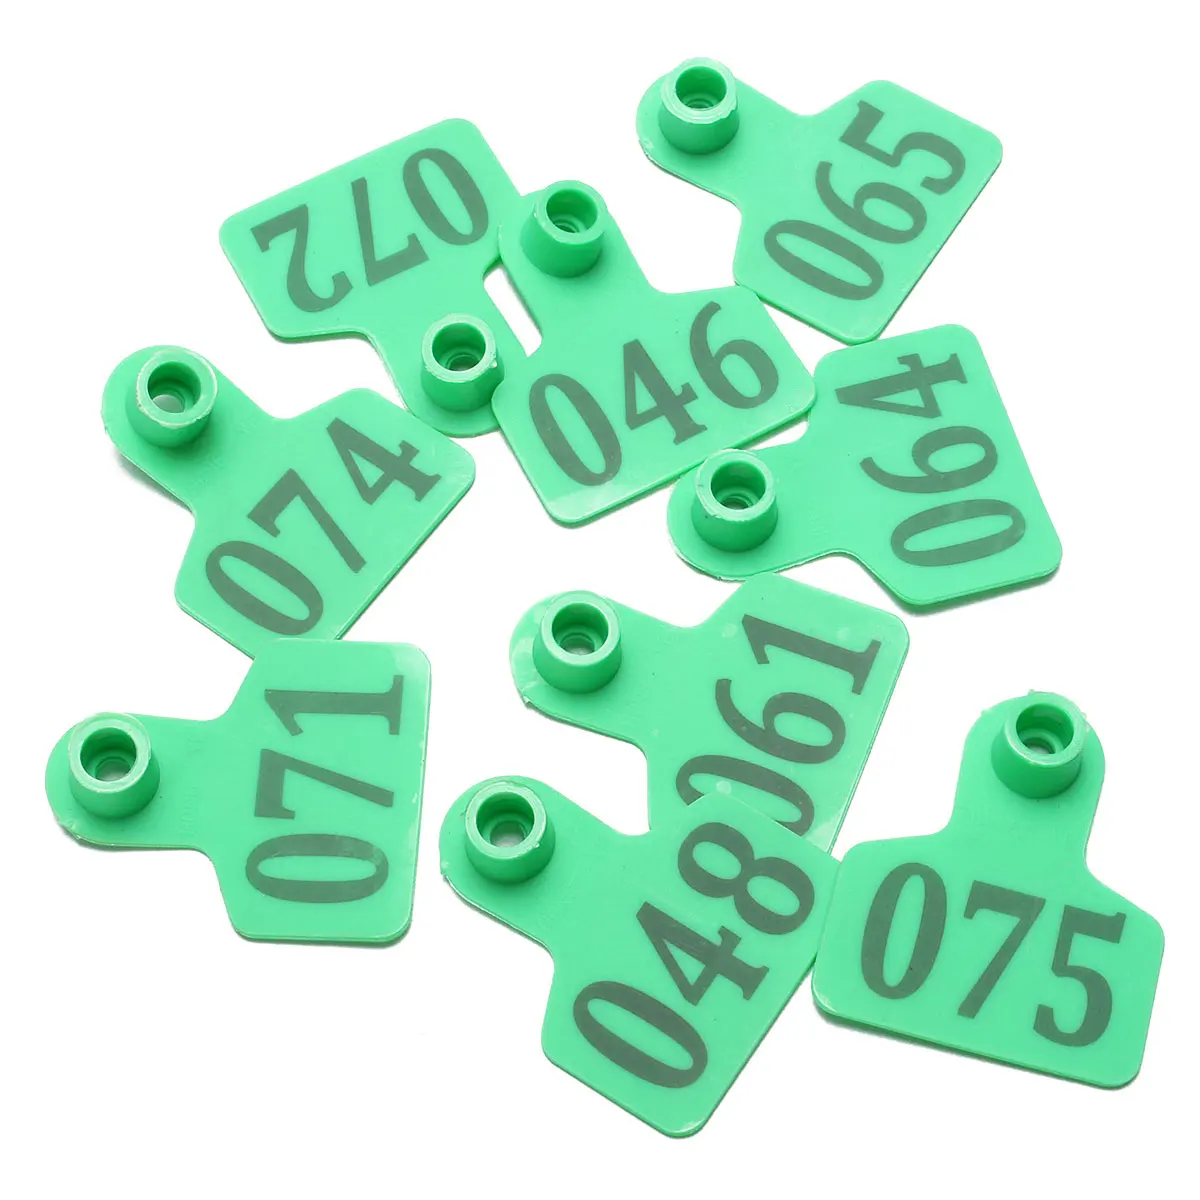 100pcs Number Ear Tag Animals Cattle Goat Pig Sheep Livestock Tags Labels Green 